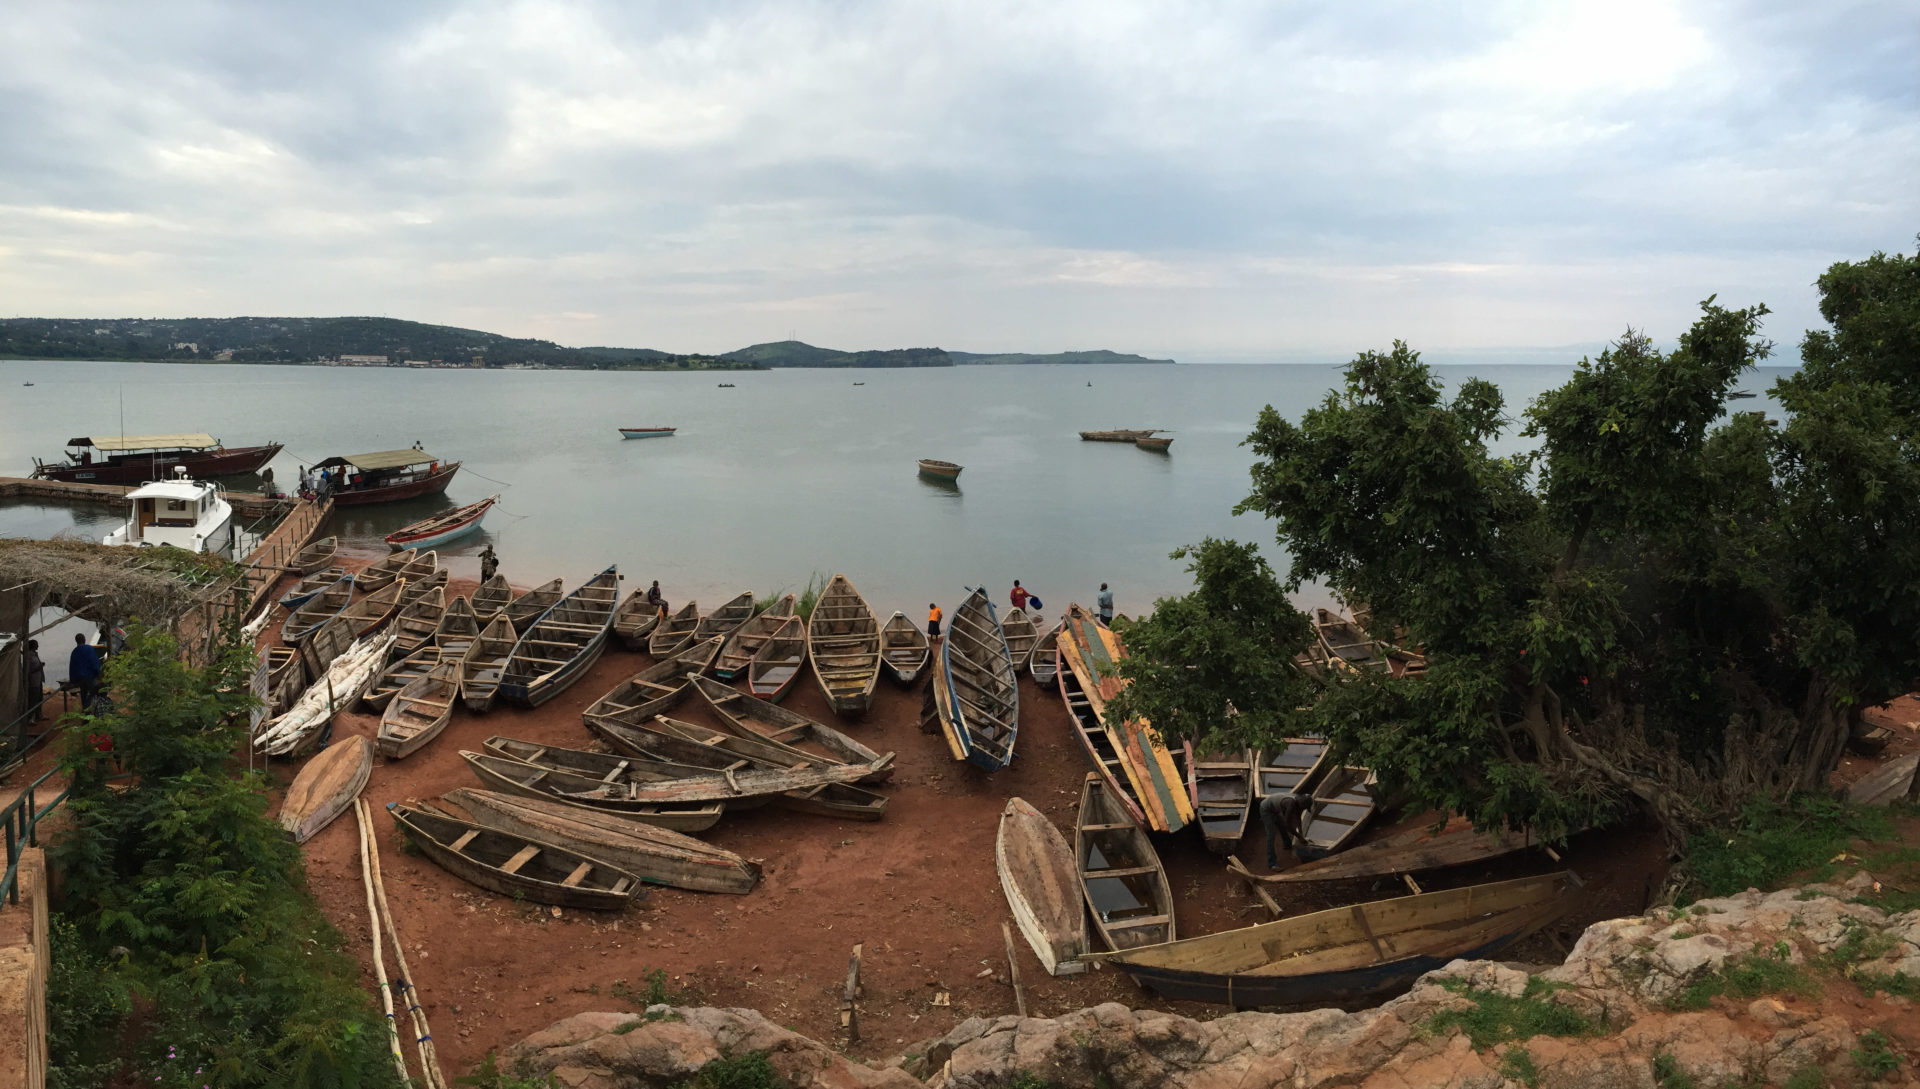 photo of Lake Tanganyika taken from shore, with boats in foreground